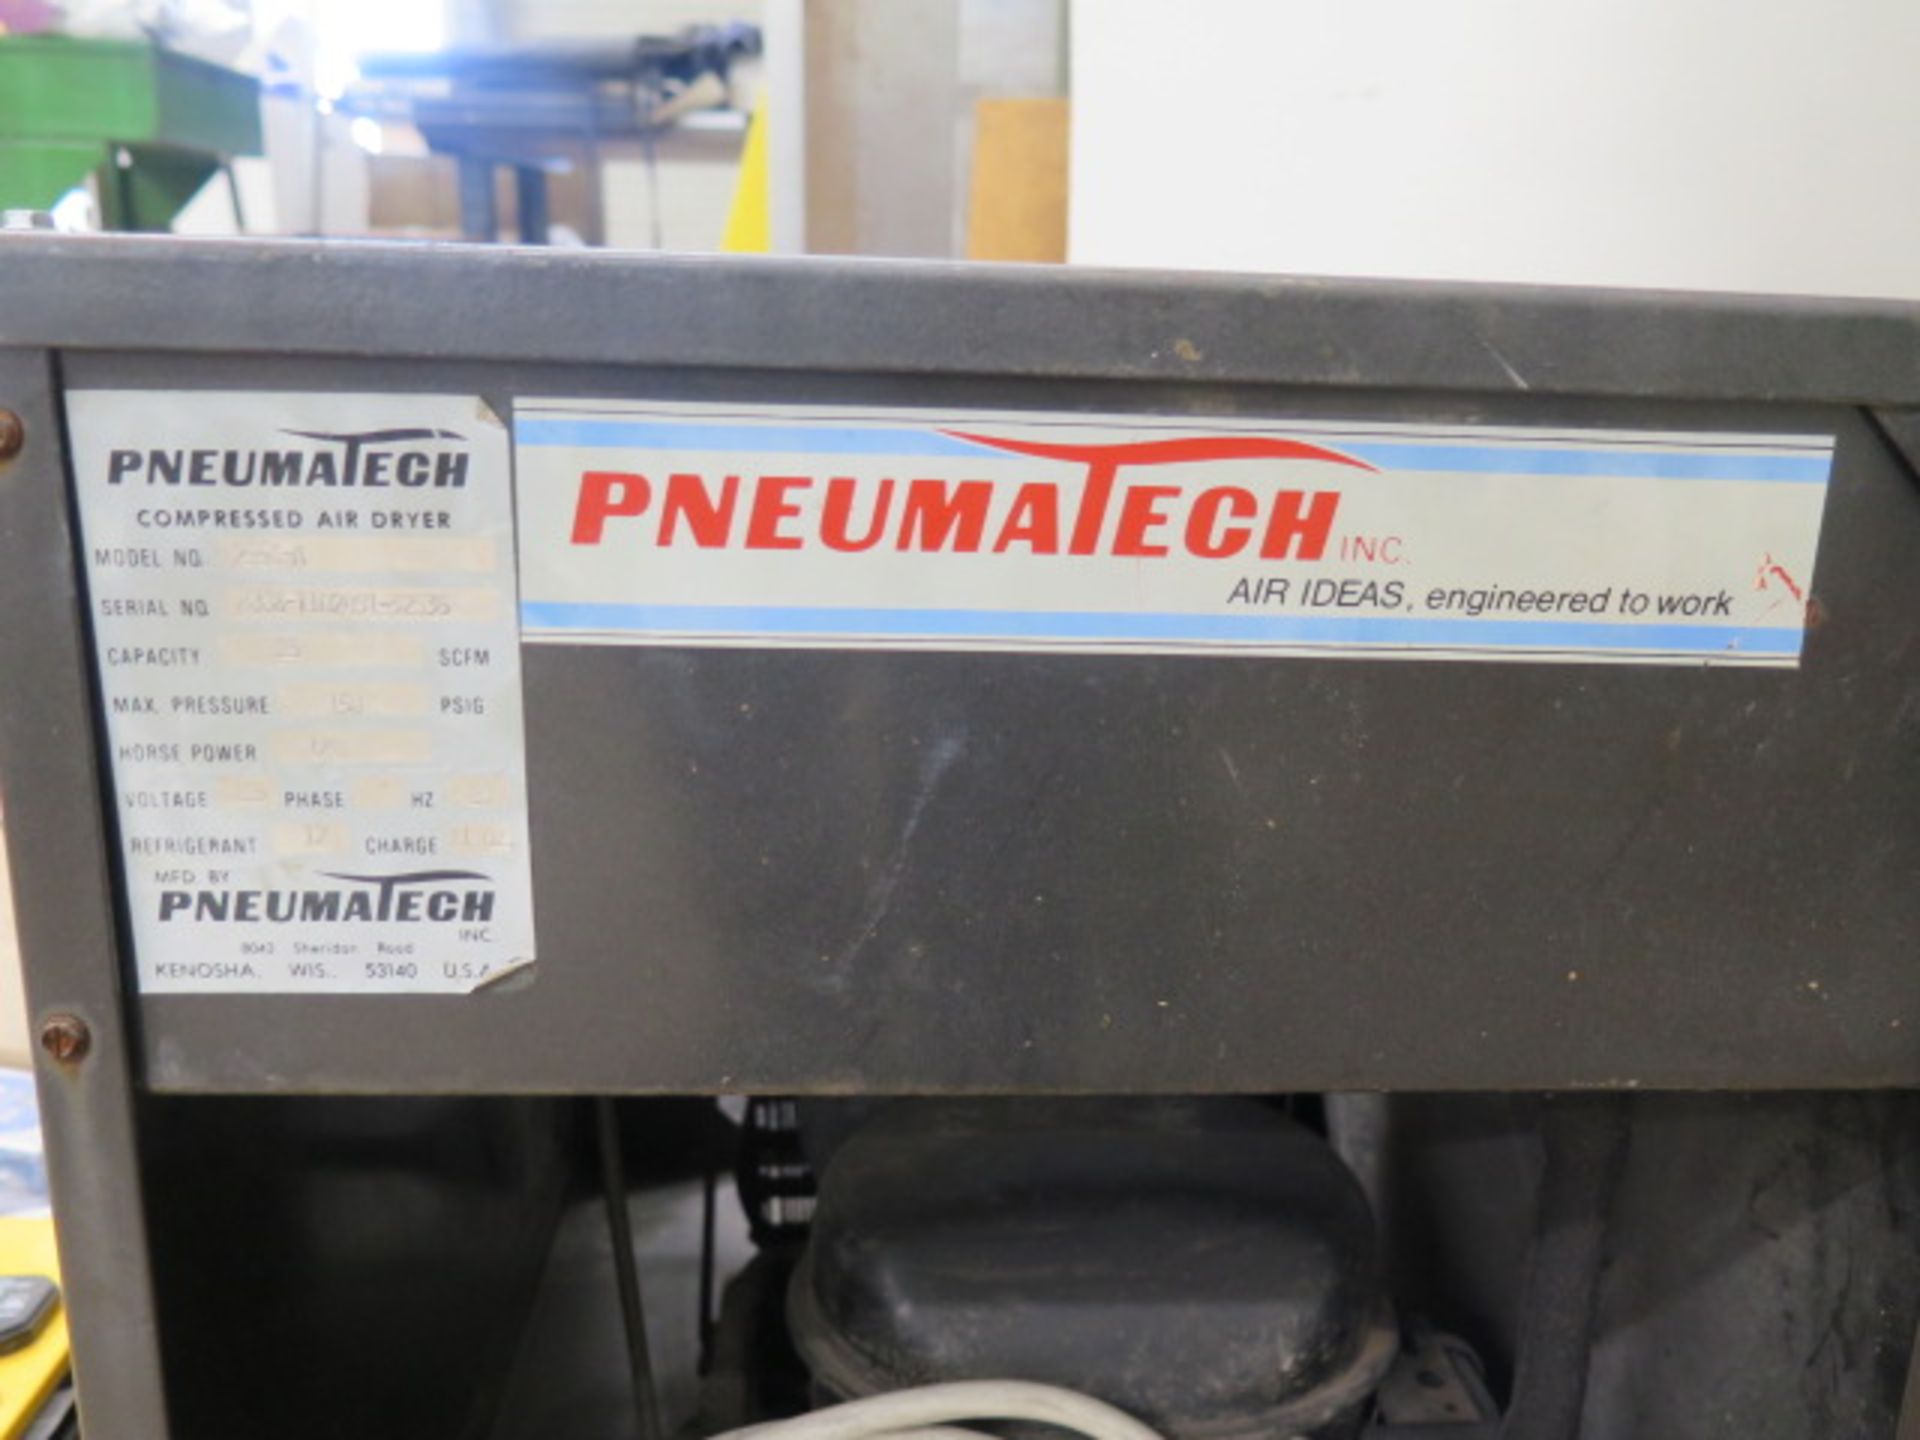 Pneumatech mdl. 2550-A Refrigerated Air Dryer s/n 8808-T102491-32936 (SOLD AS-IS - NO WARRANTY) - Image 4 of 4